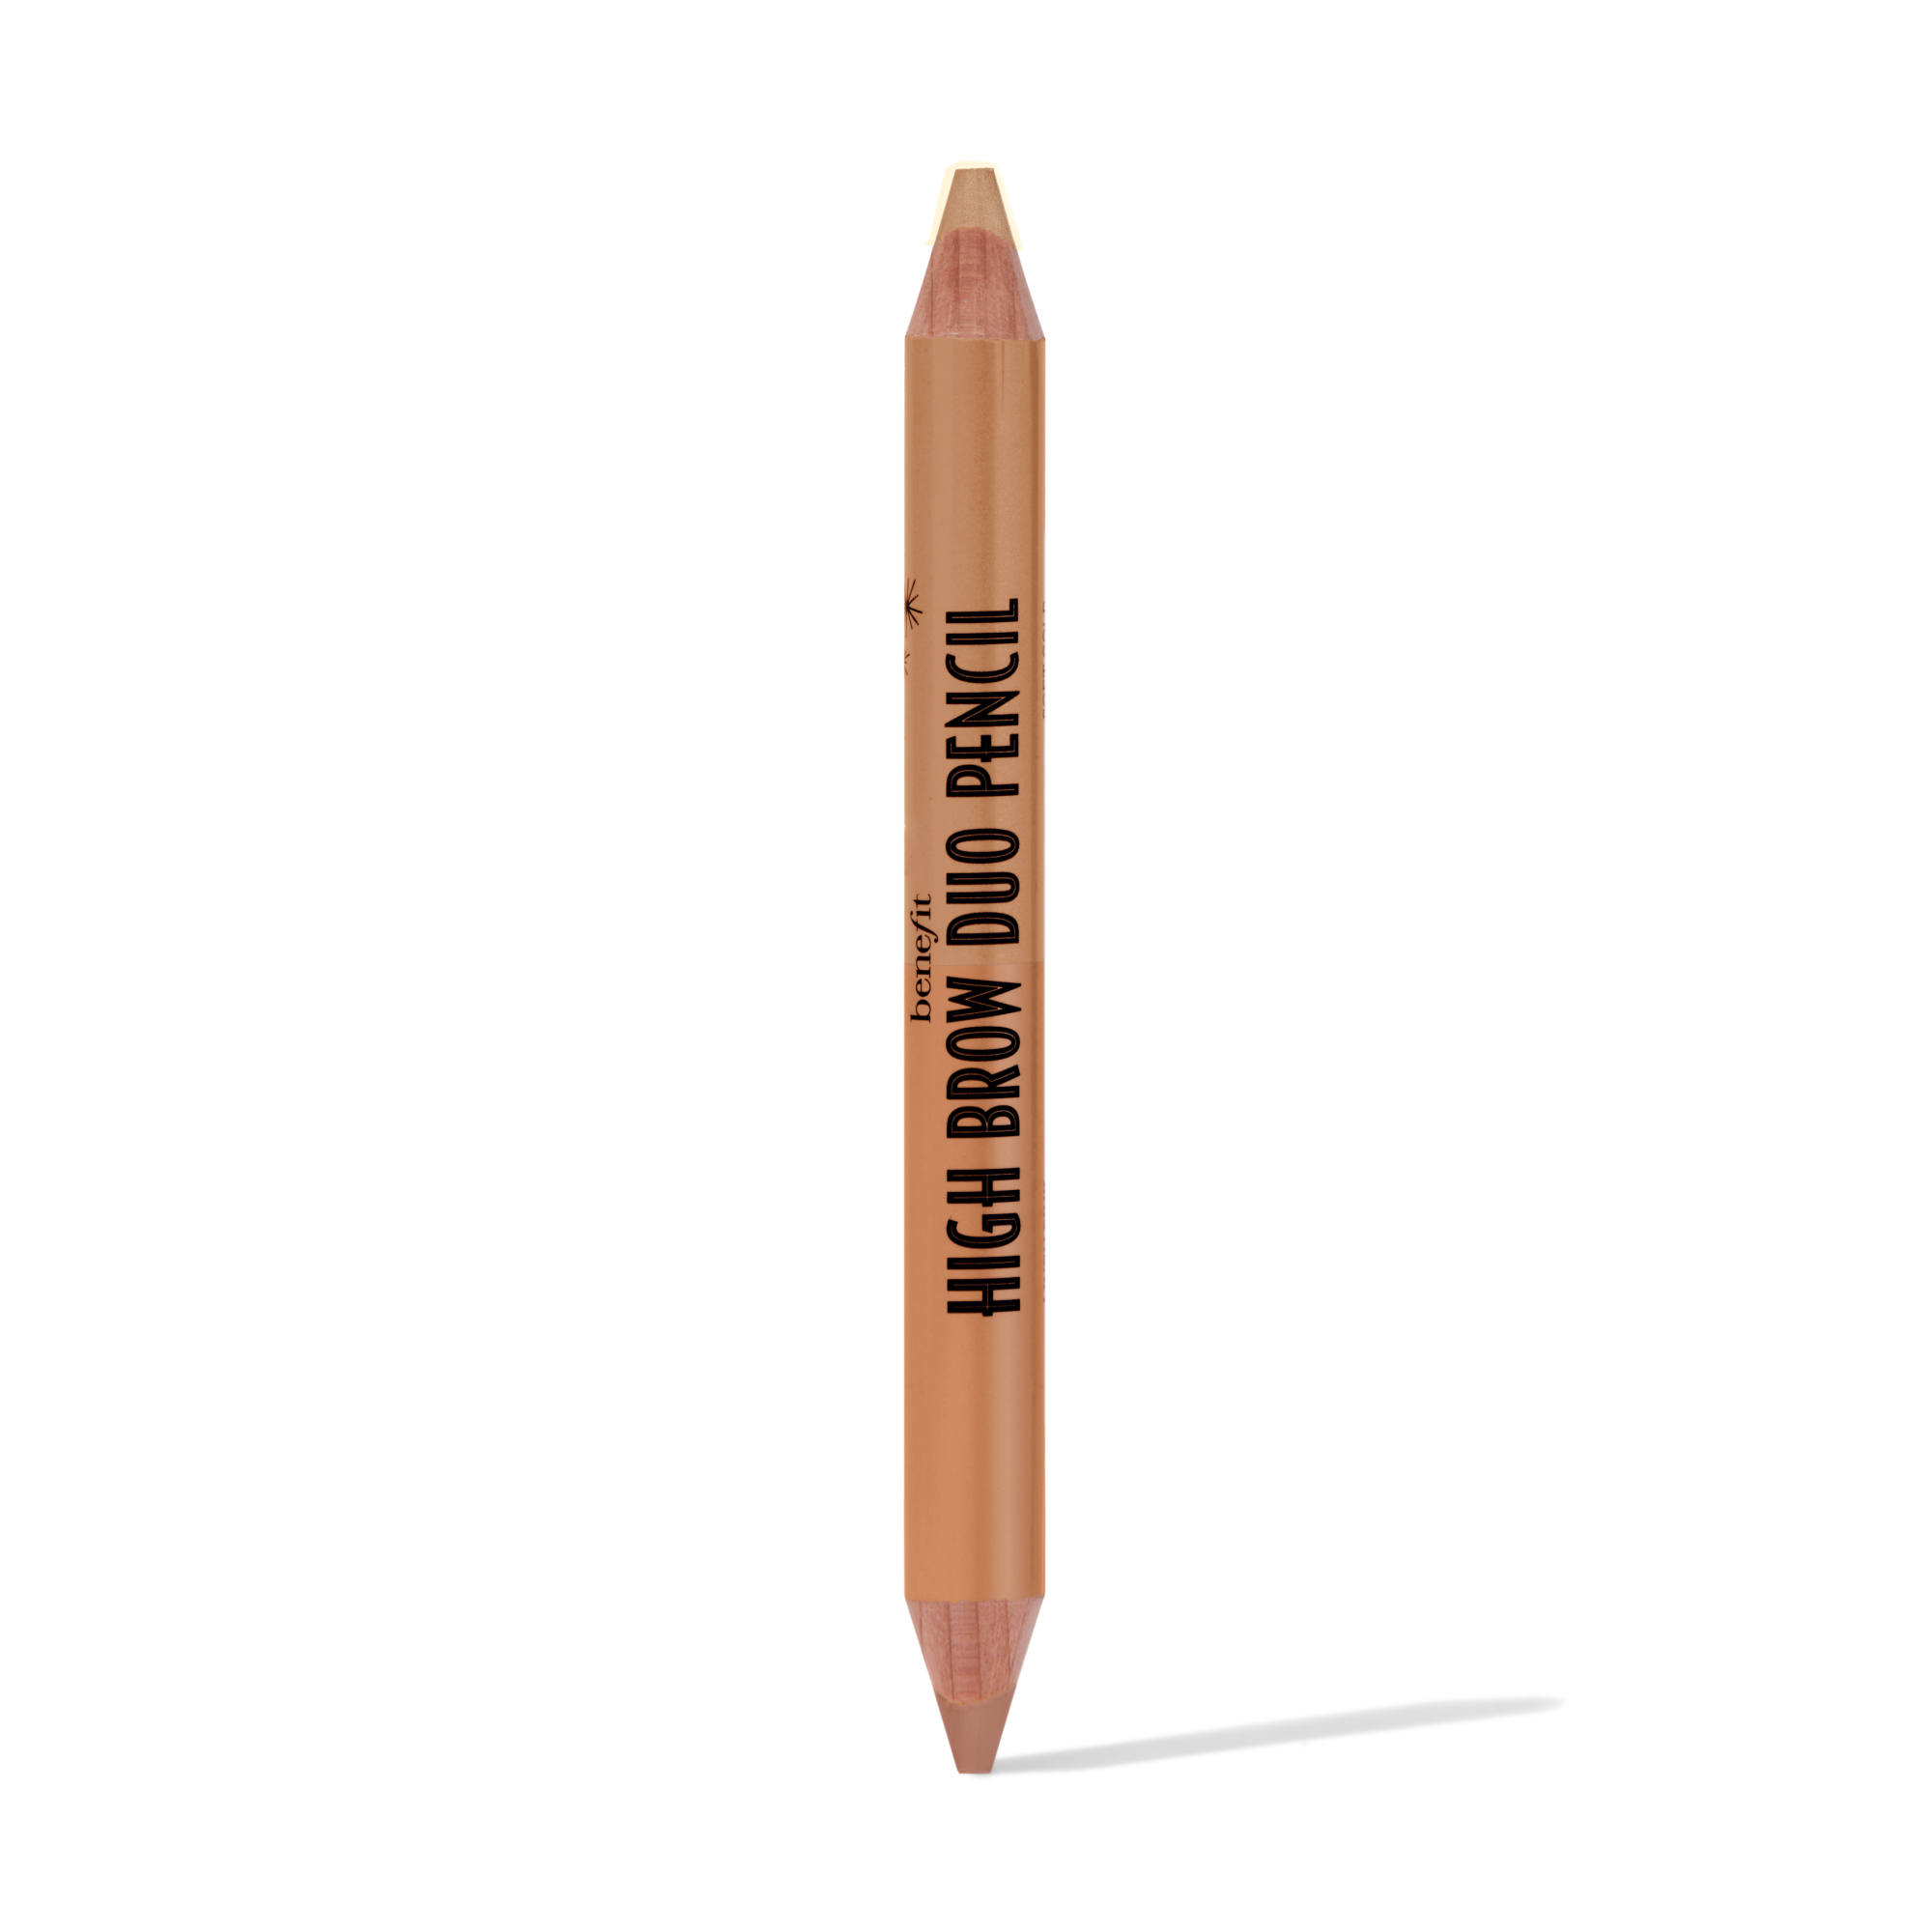 Benefit Cosmetics High Brow Duo Pencil, in Colour: Deep, Size: One Size